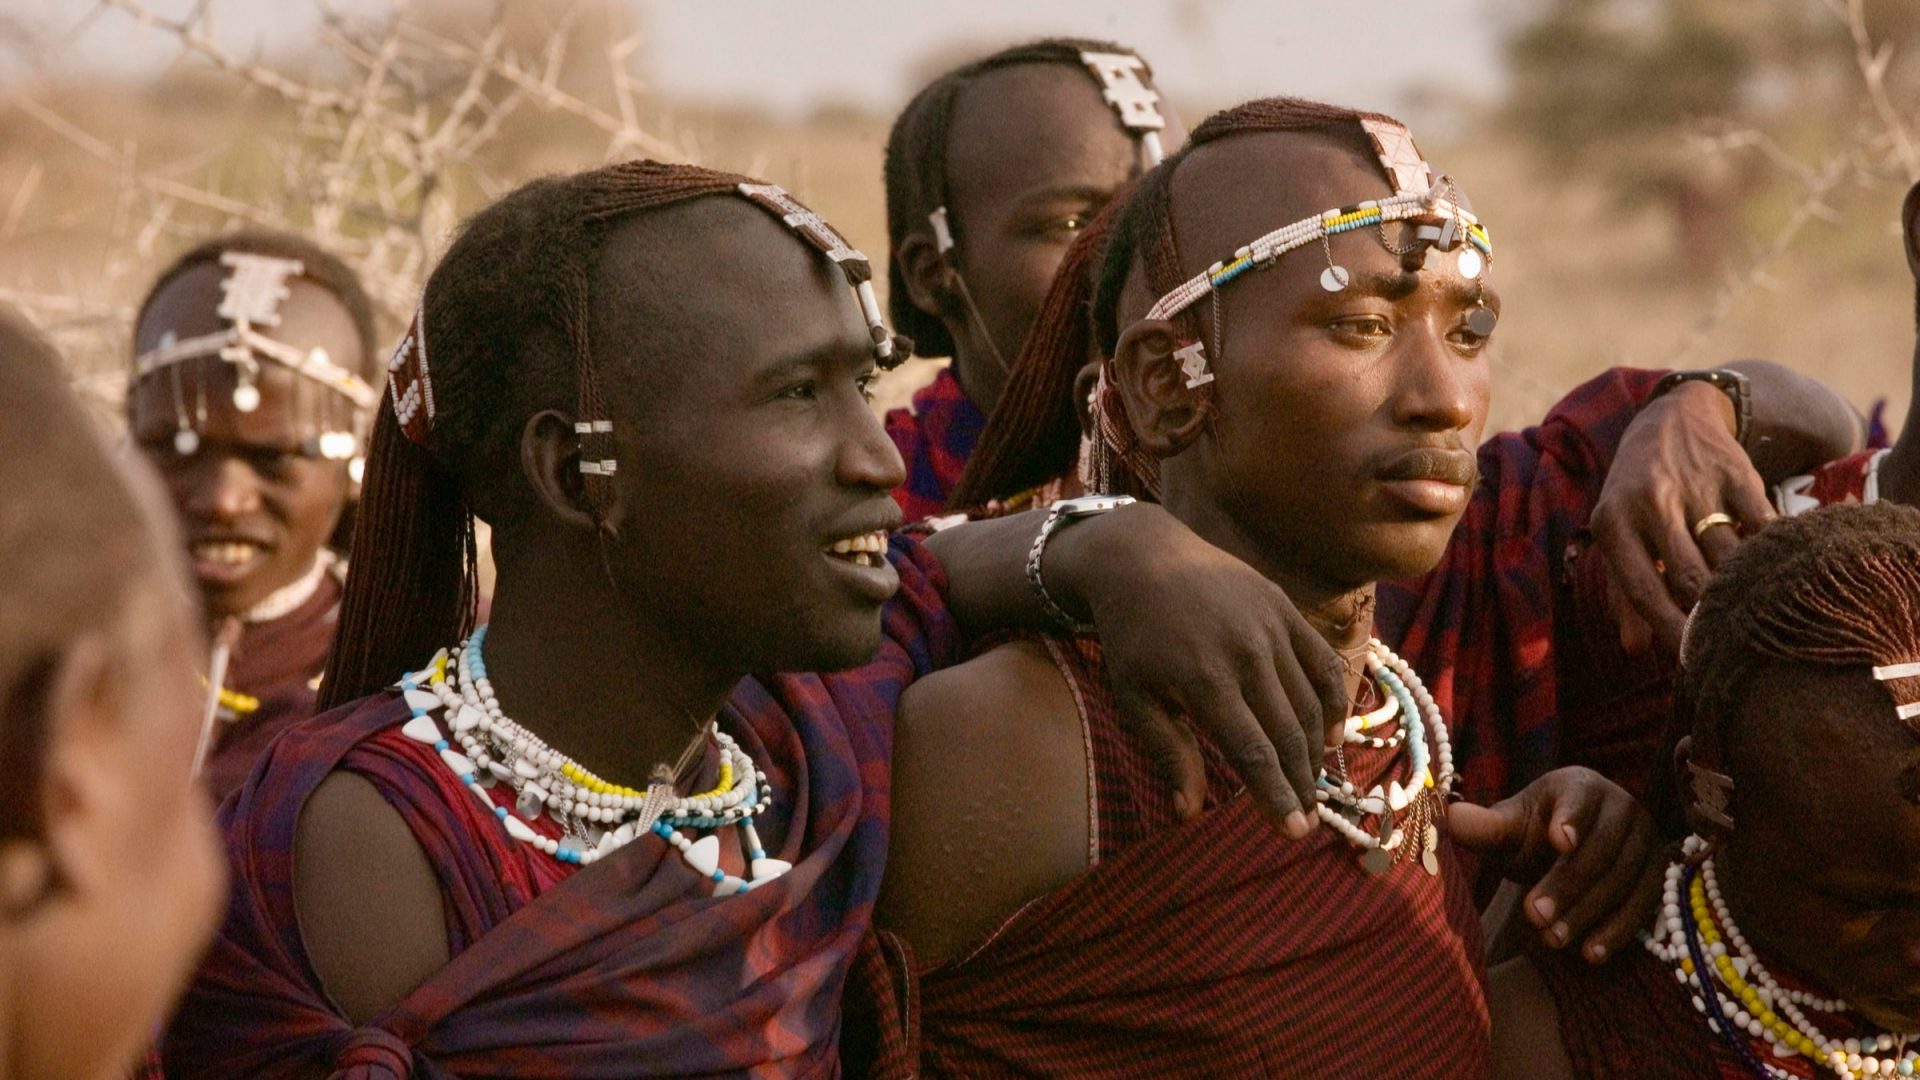 The Maasai are facing a battle for their home. How did we get here, and why?